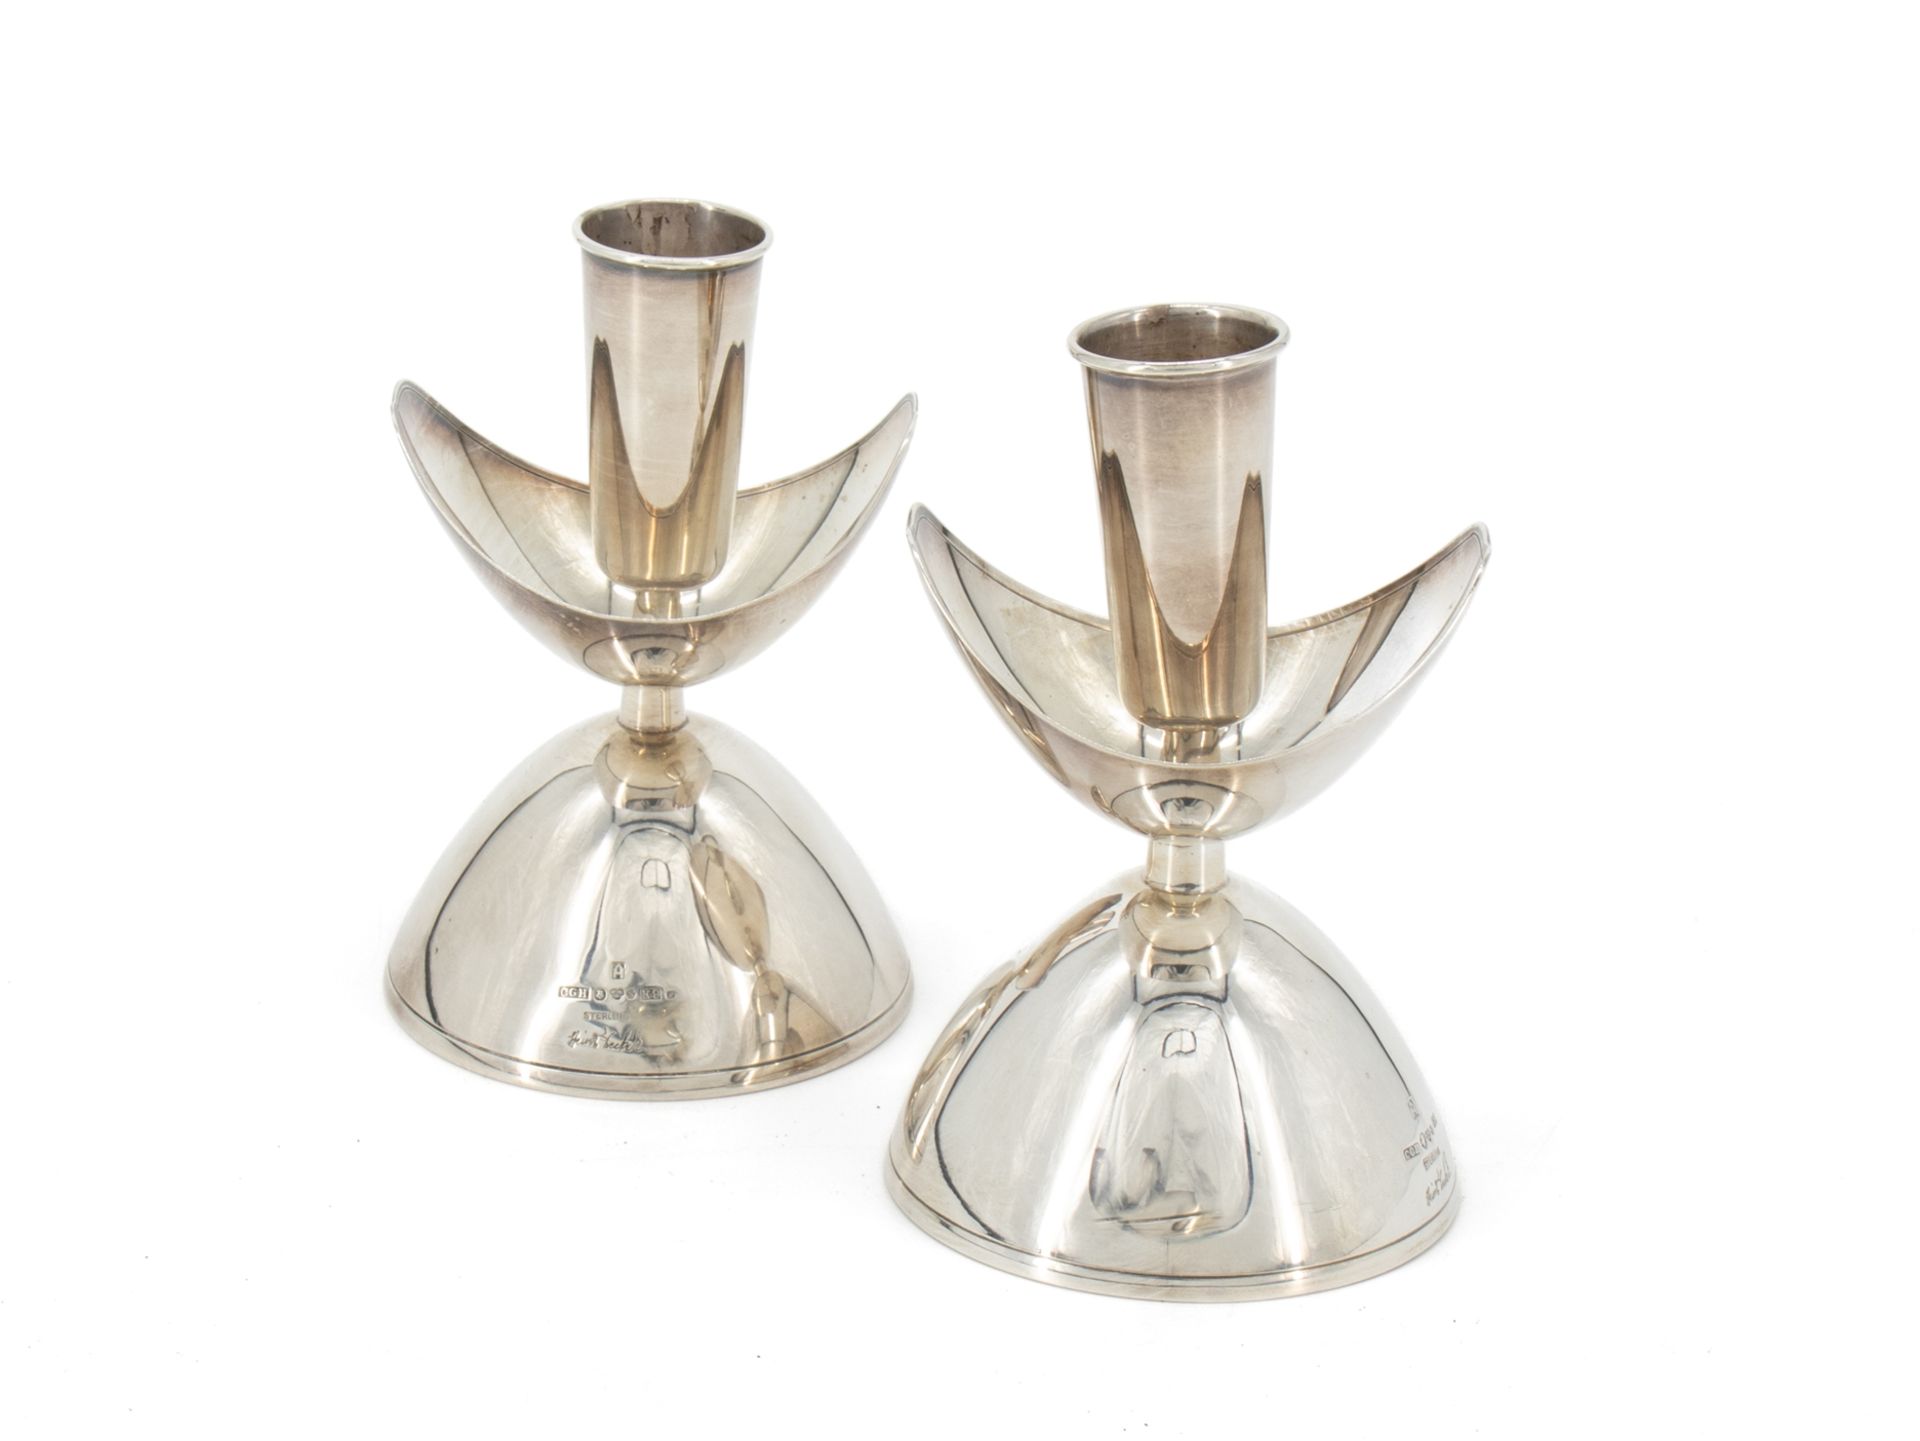 Pair of candlesticks, Sweden, sterling silver, from 1960.